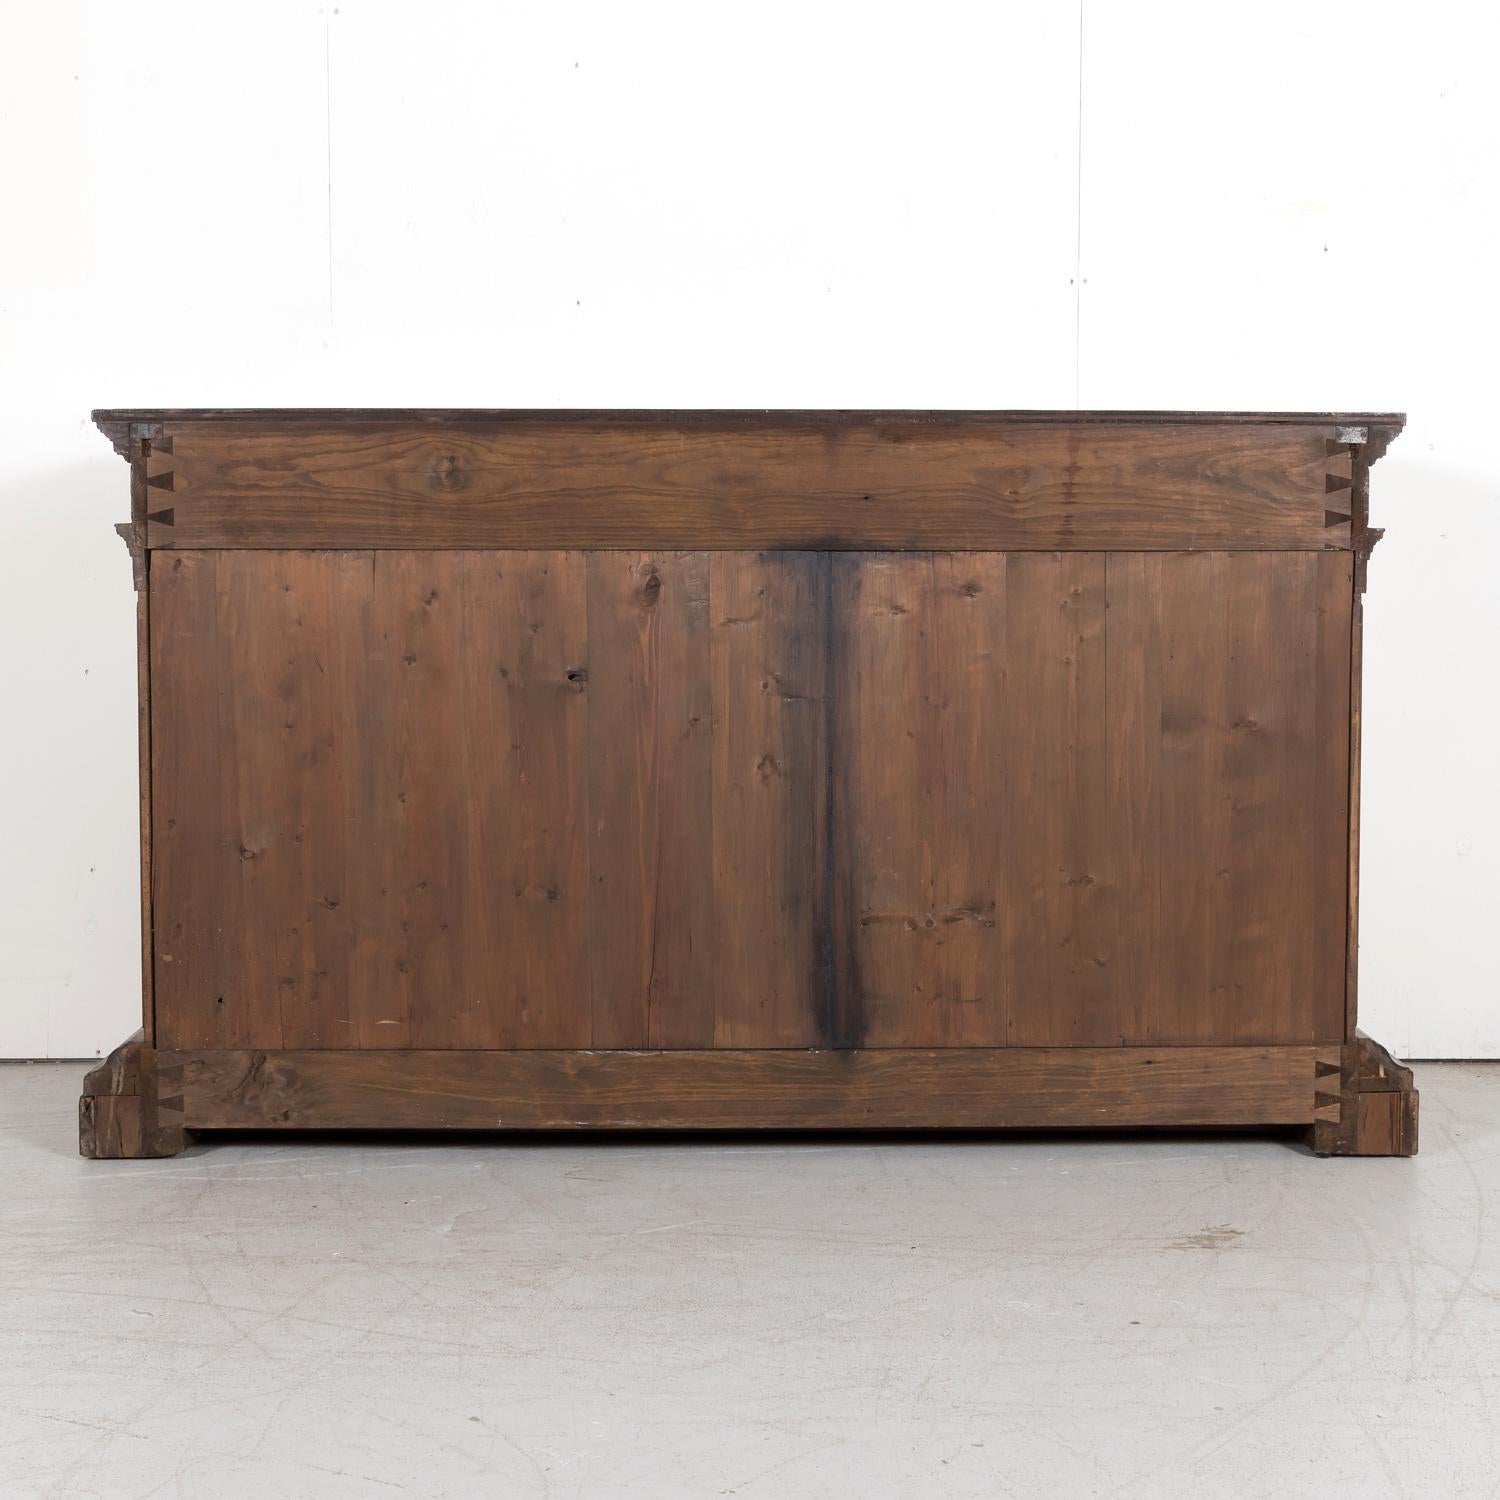 19th Century, Spanish Renaissance Style Carved Walnut Wall Console with Drawers For Sale 15